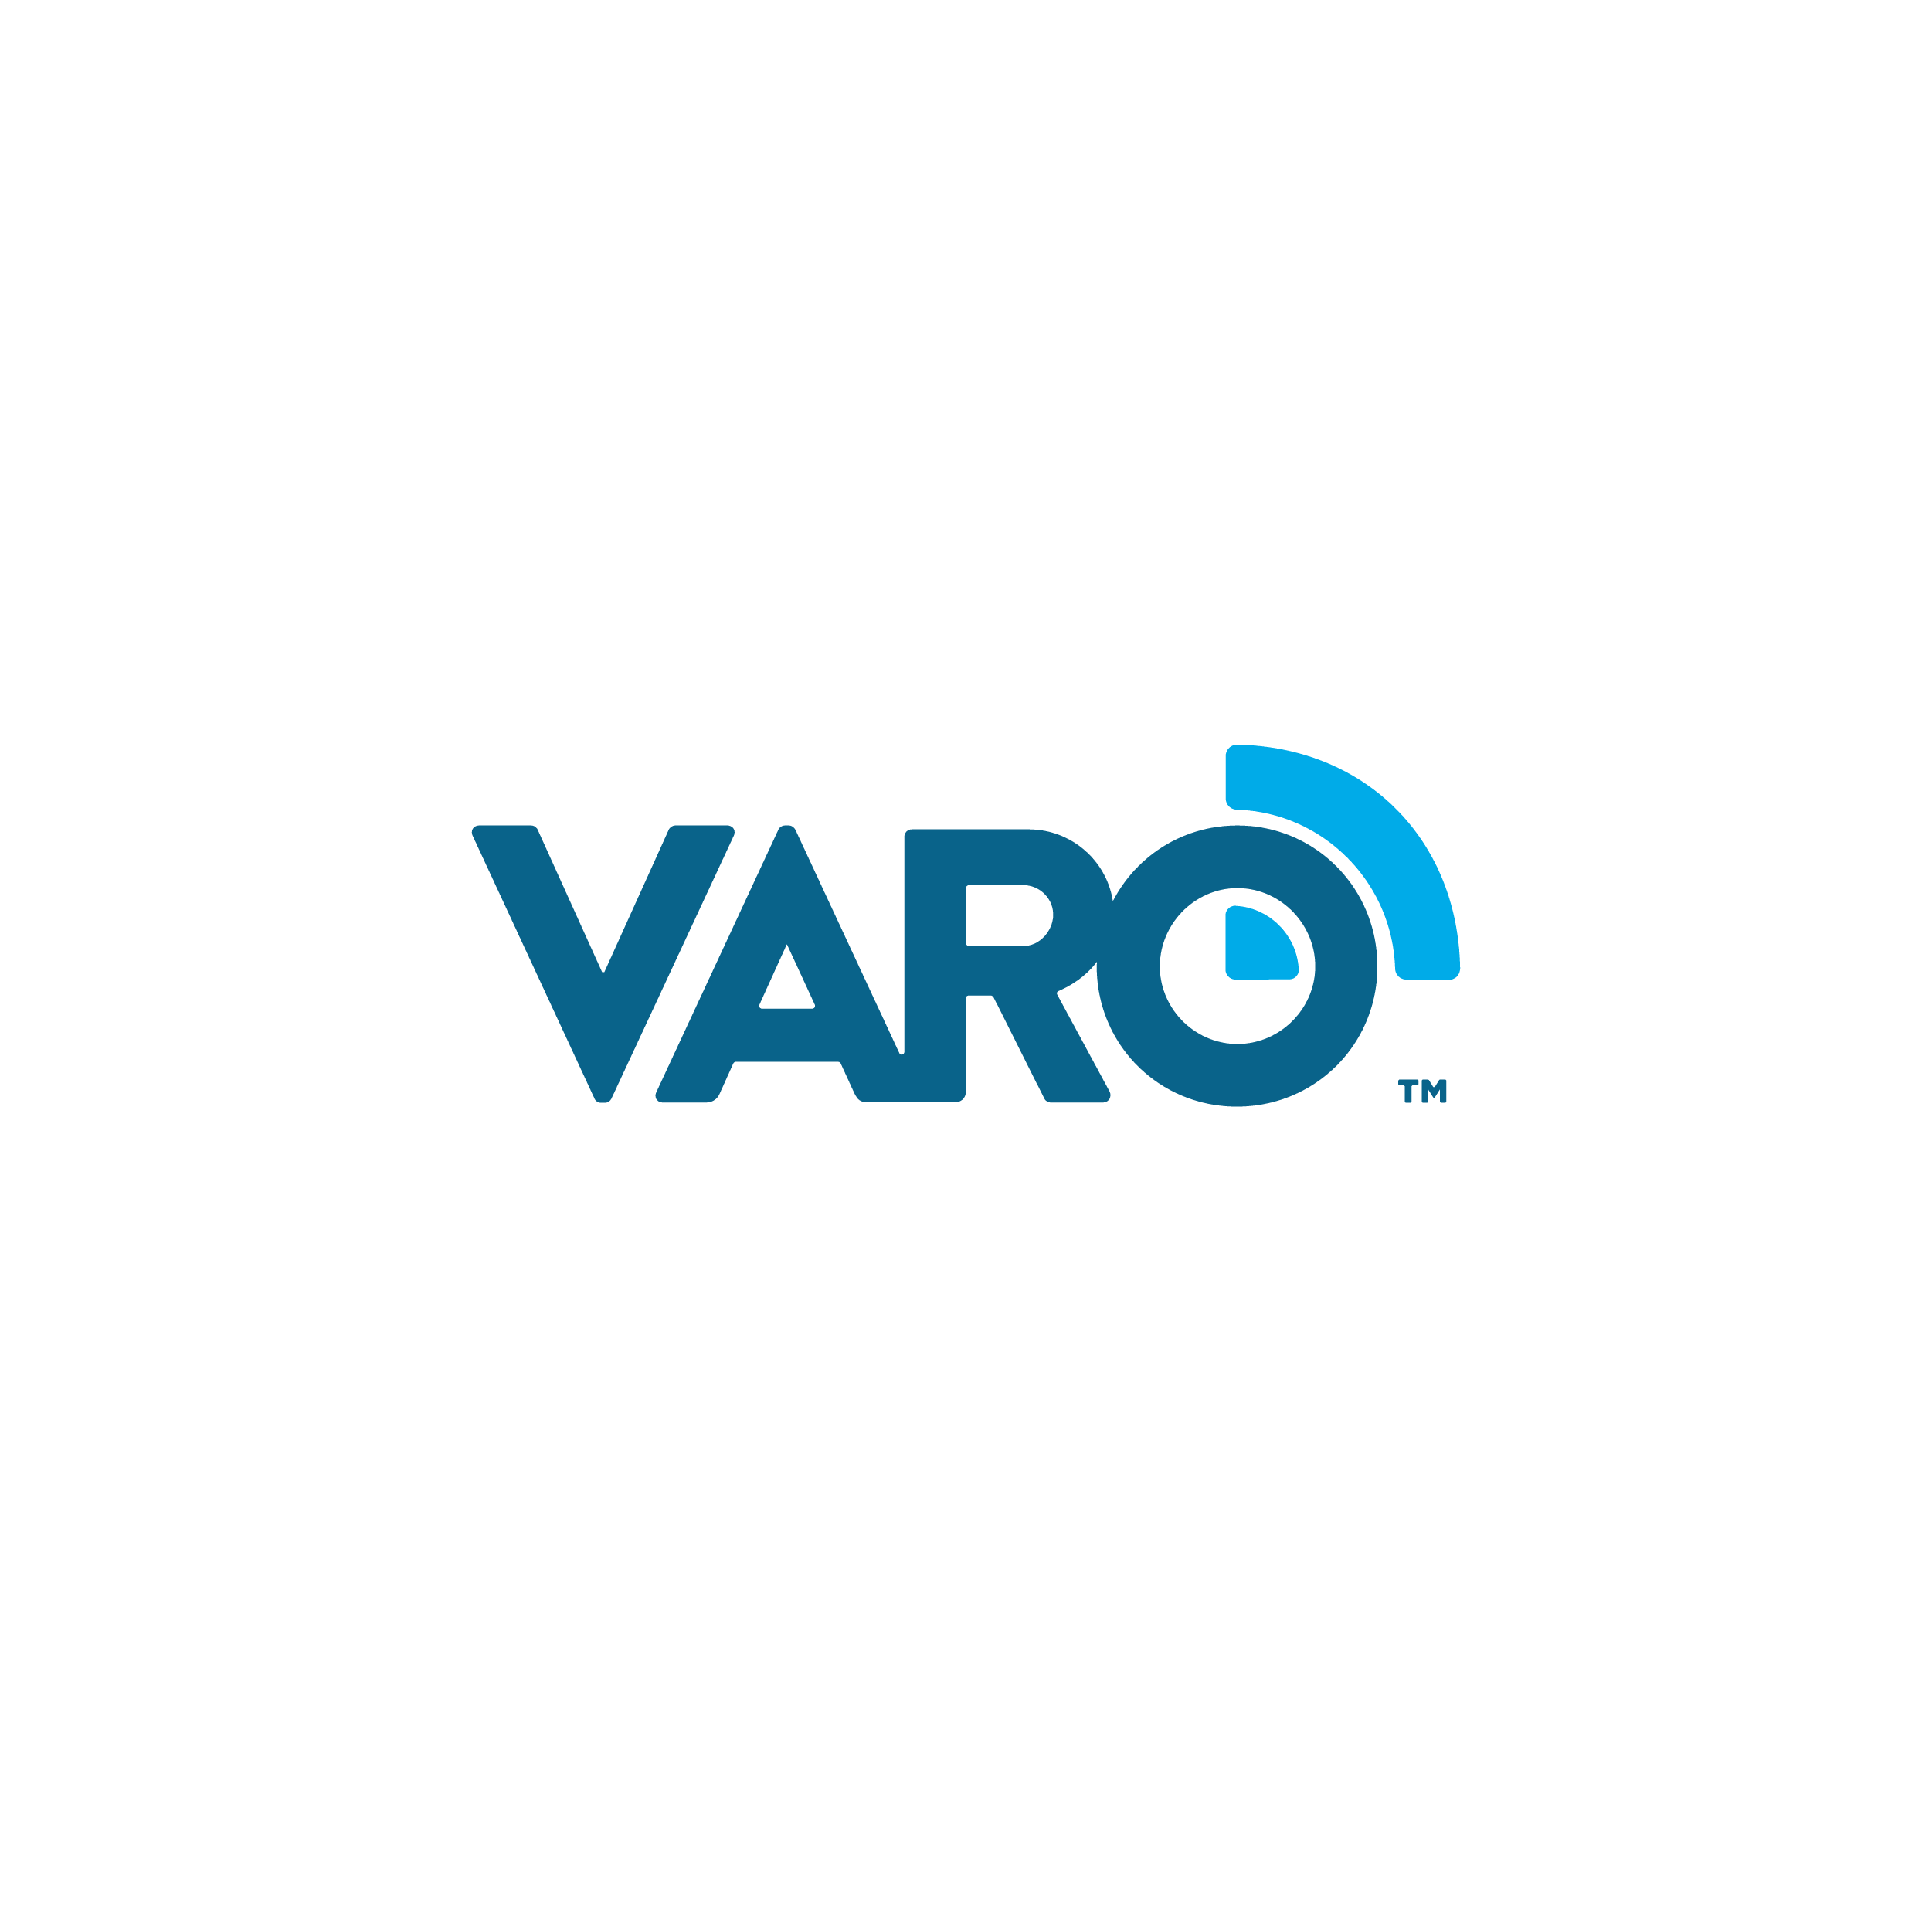 Varo | Transmit cold chain temperature logs to any inbox.